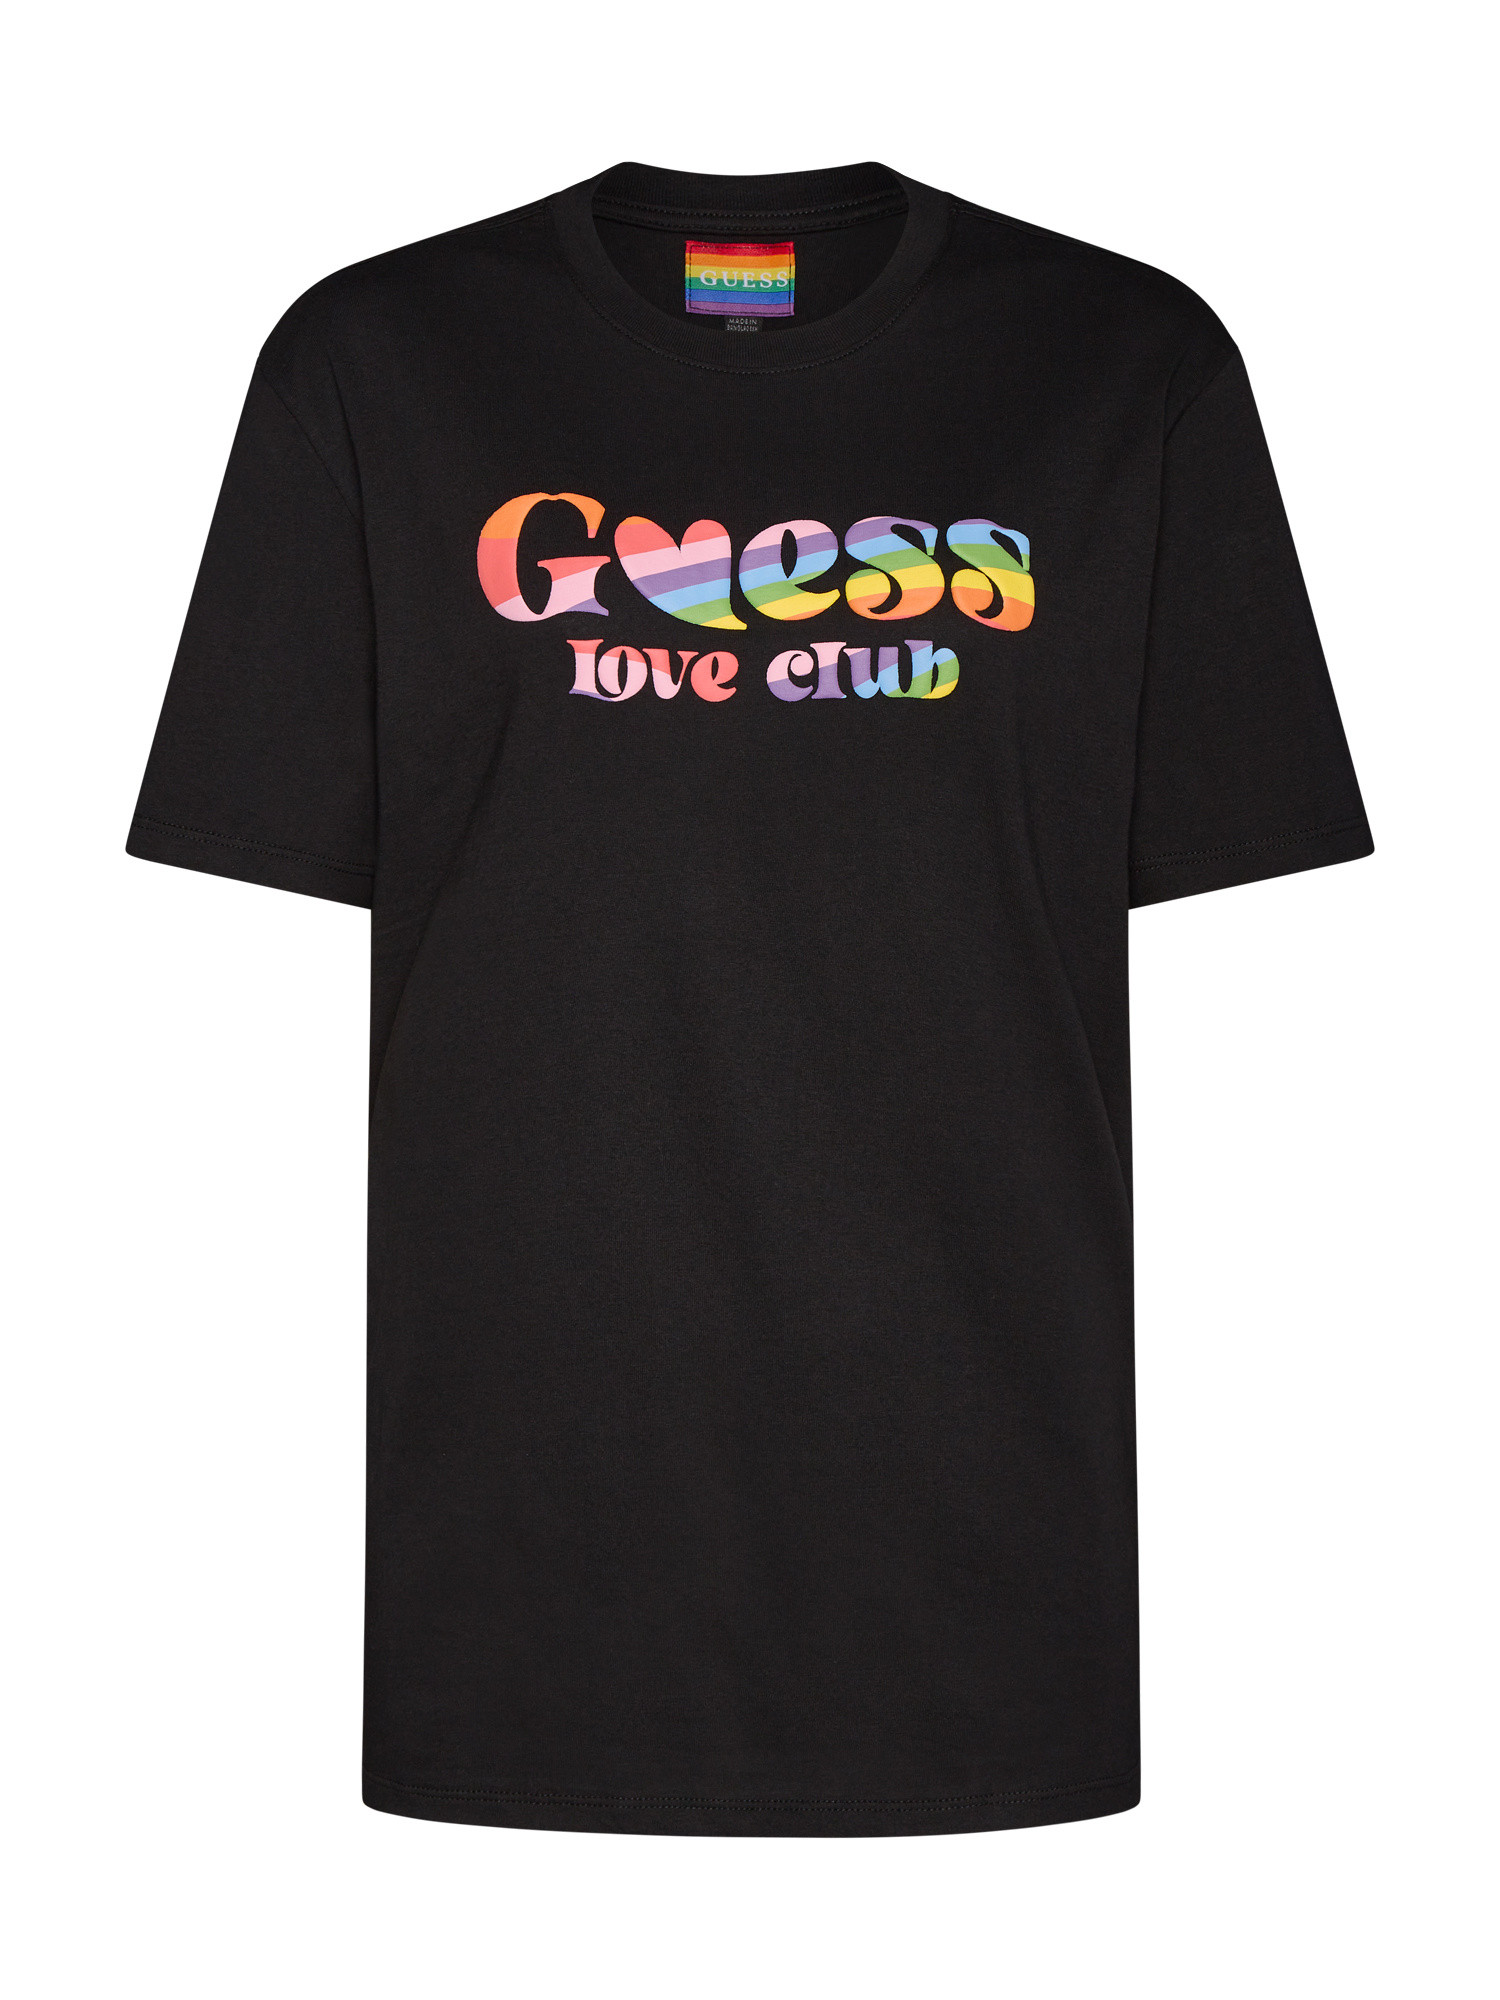 Guess - T-shirt with logo, Black, large image number 0